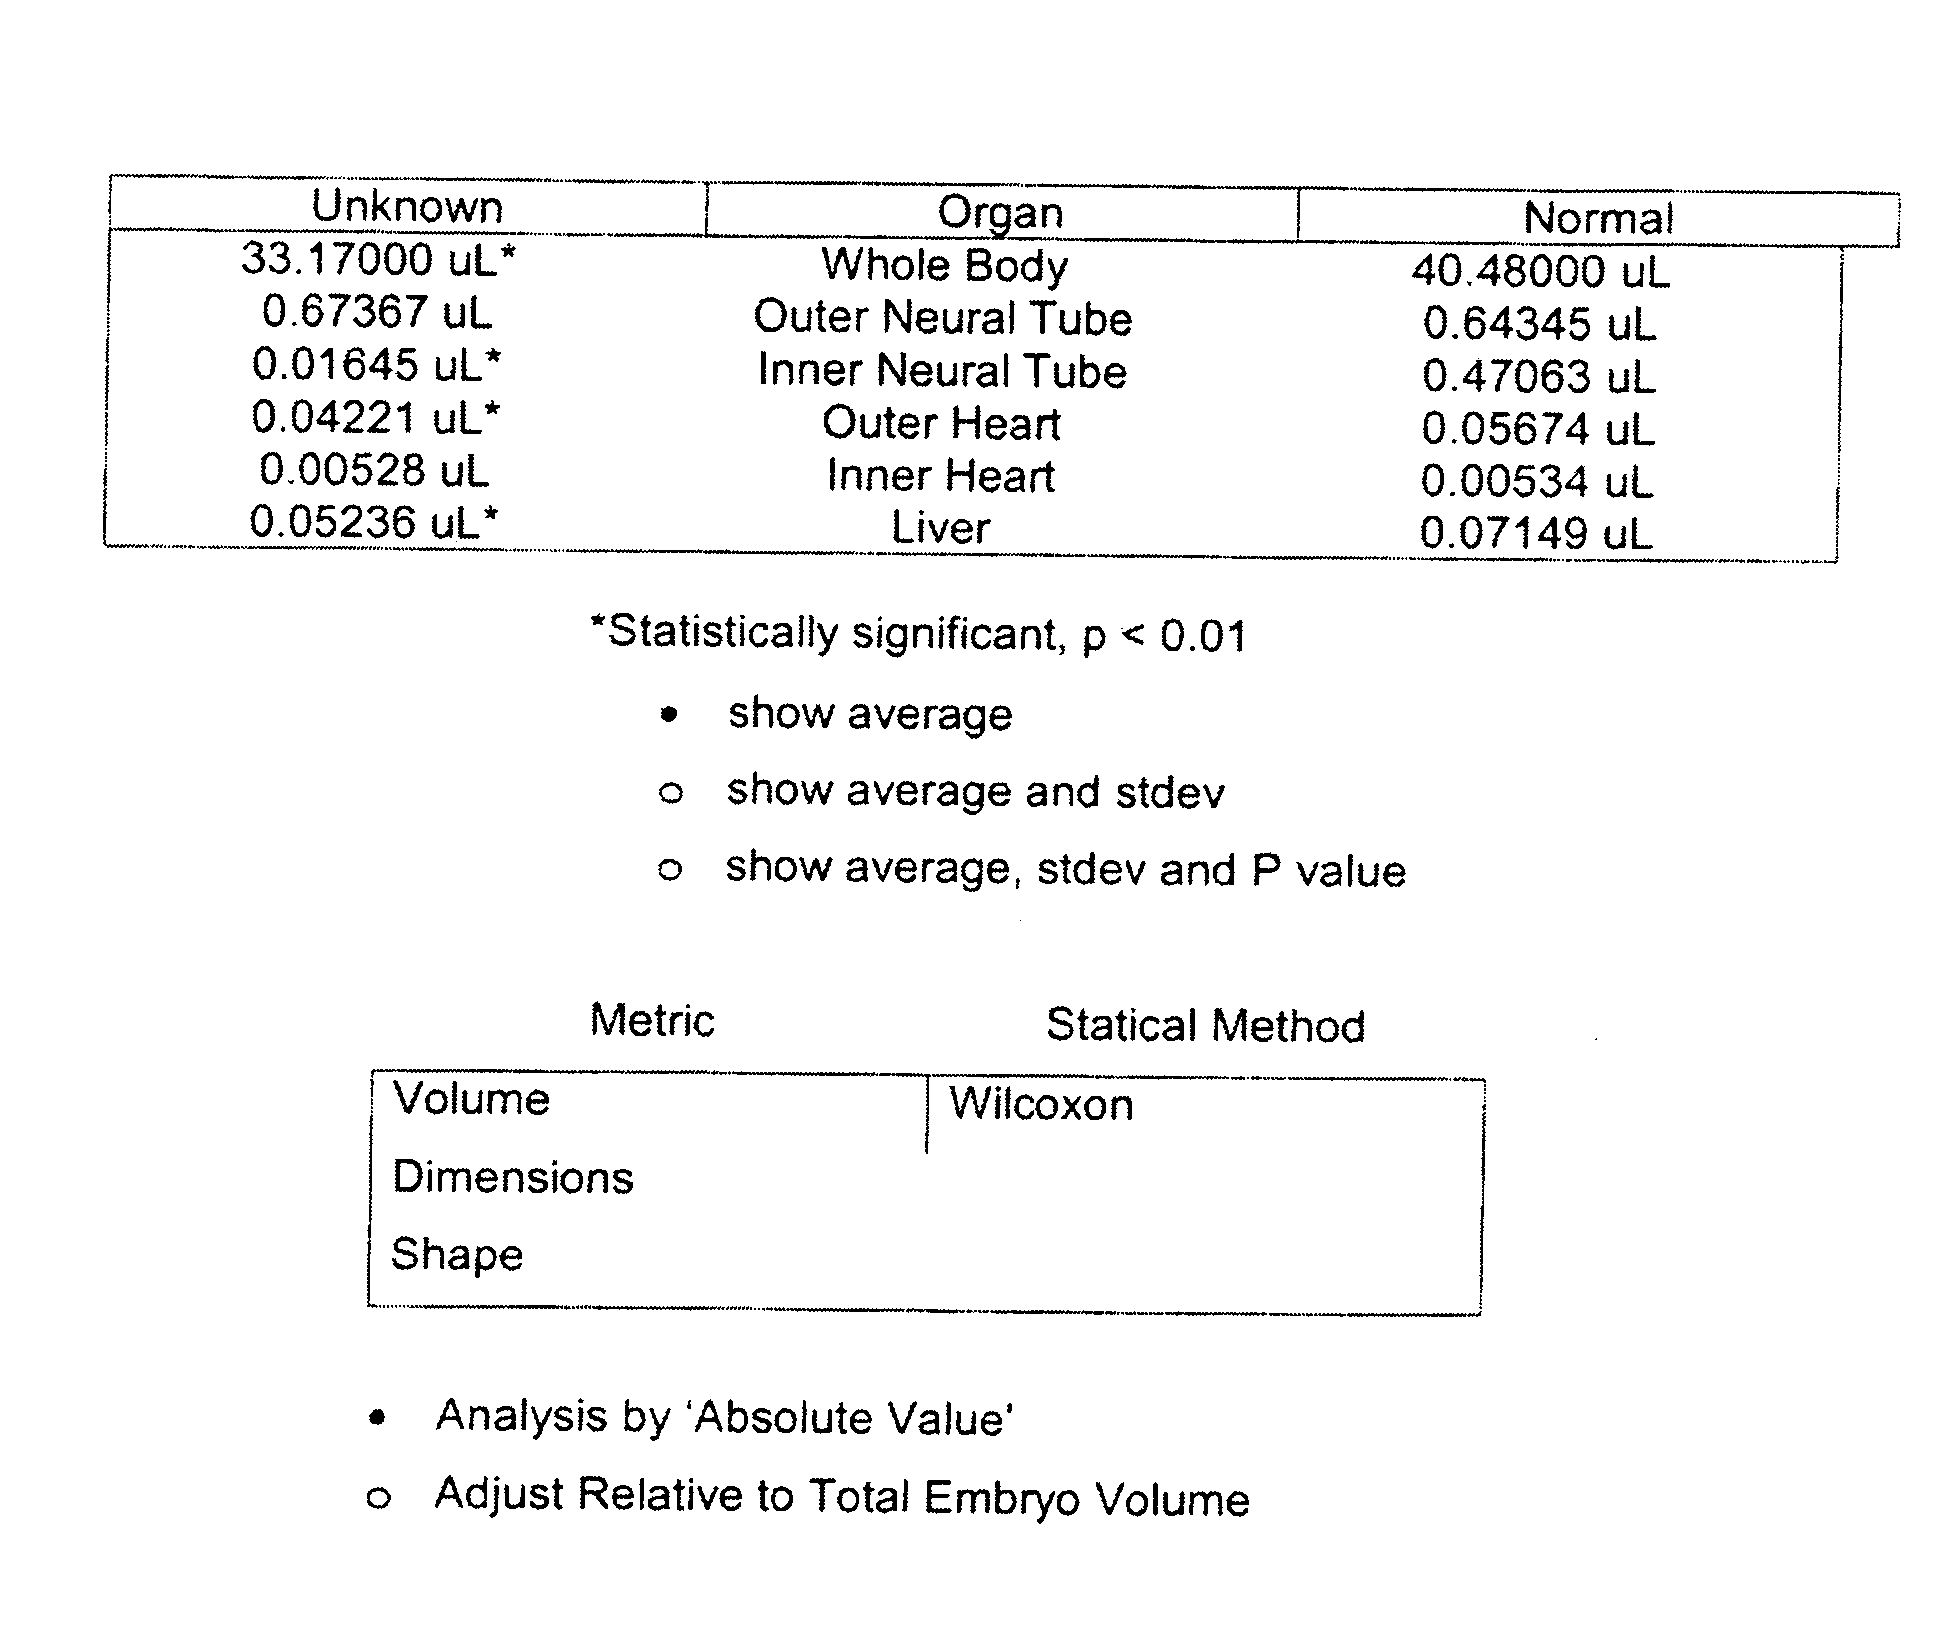 Methods, Compositions and Systems for Analyzing Imaging Data